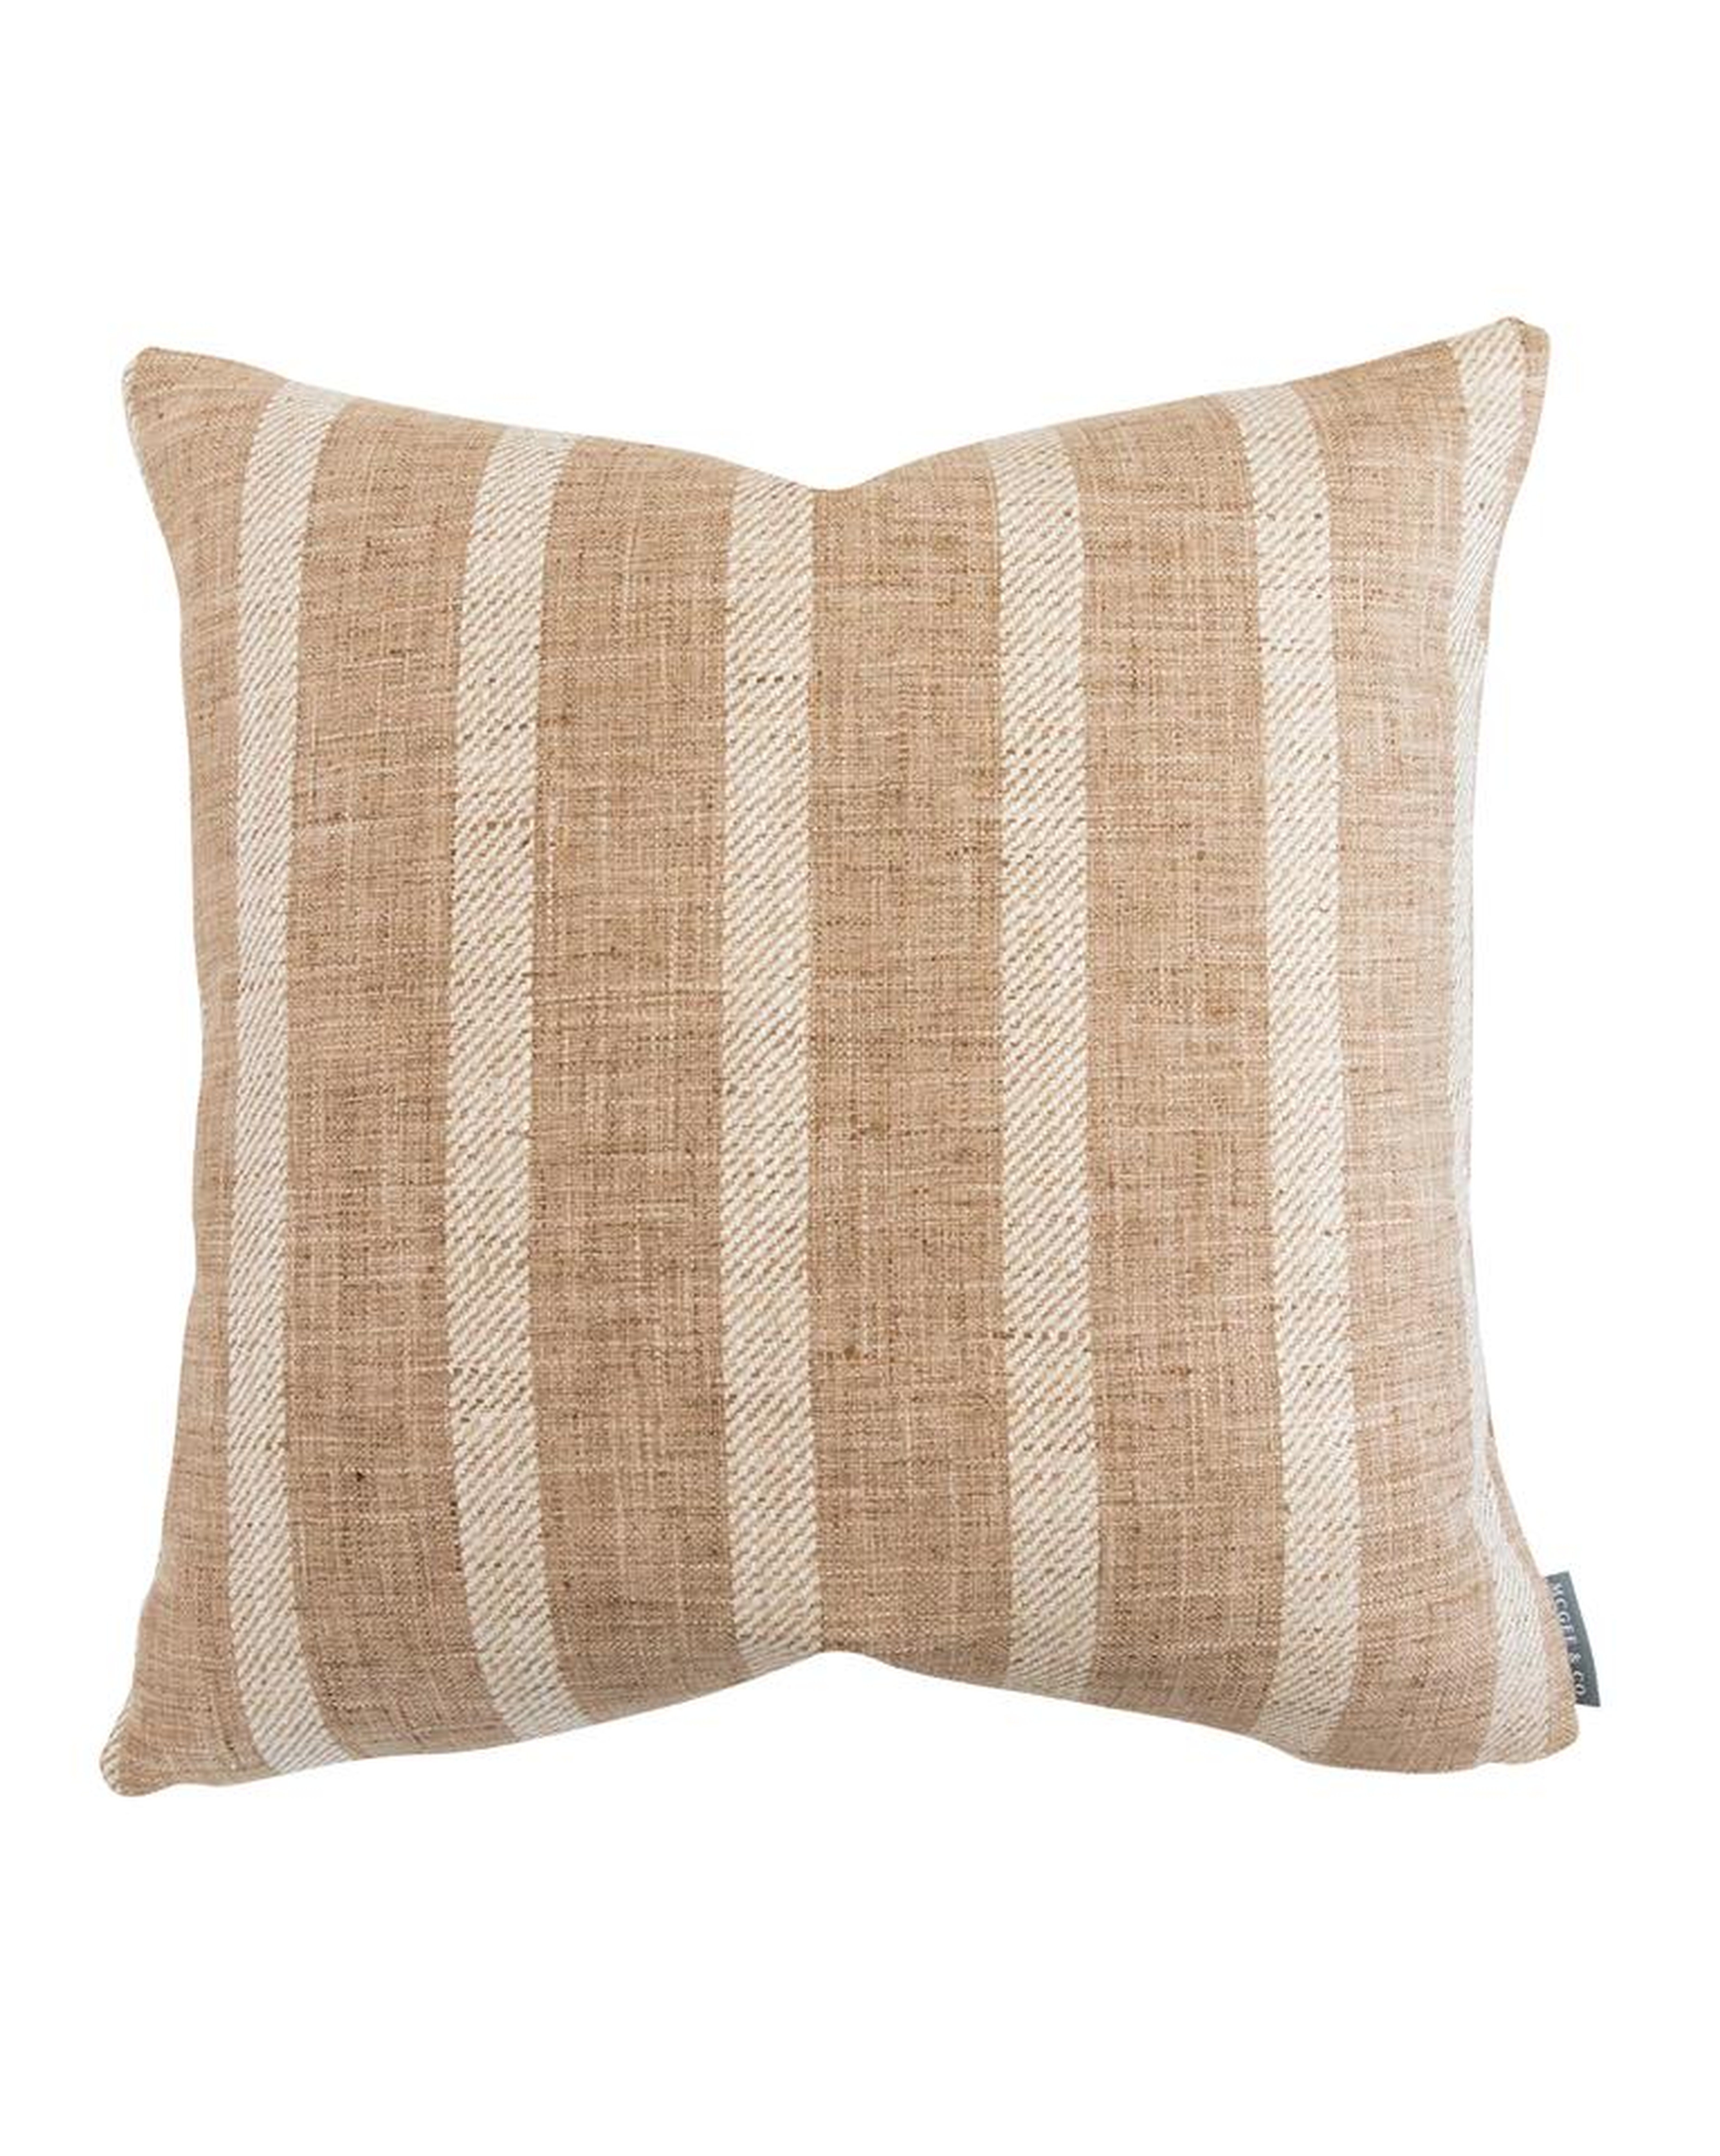 Uriah Pillow Cover, 22" x 22" - McGee & Co.